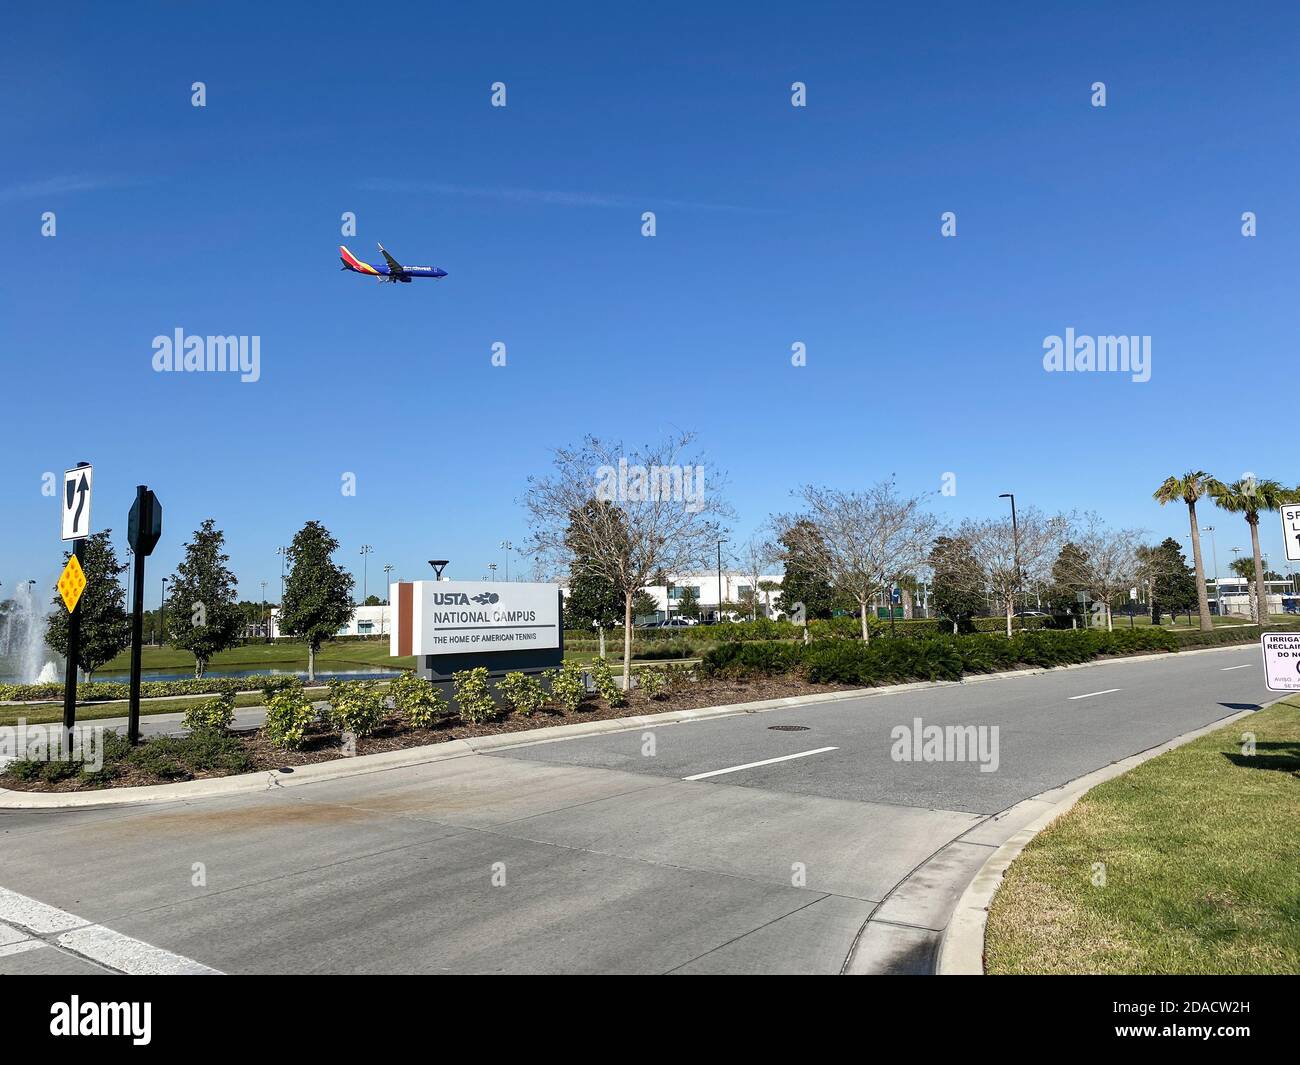 Orlando,FL/USA - 2/29/20:  The sign to the entrance of the United States Tennis Association facilities with a Southwest Airlines plane flying overhead Stock Photo